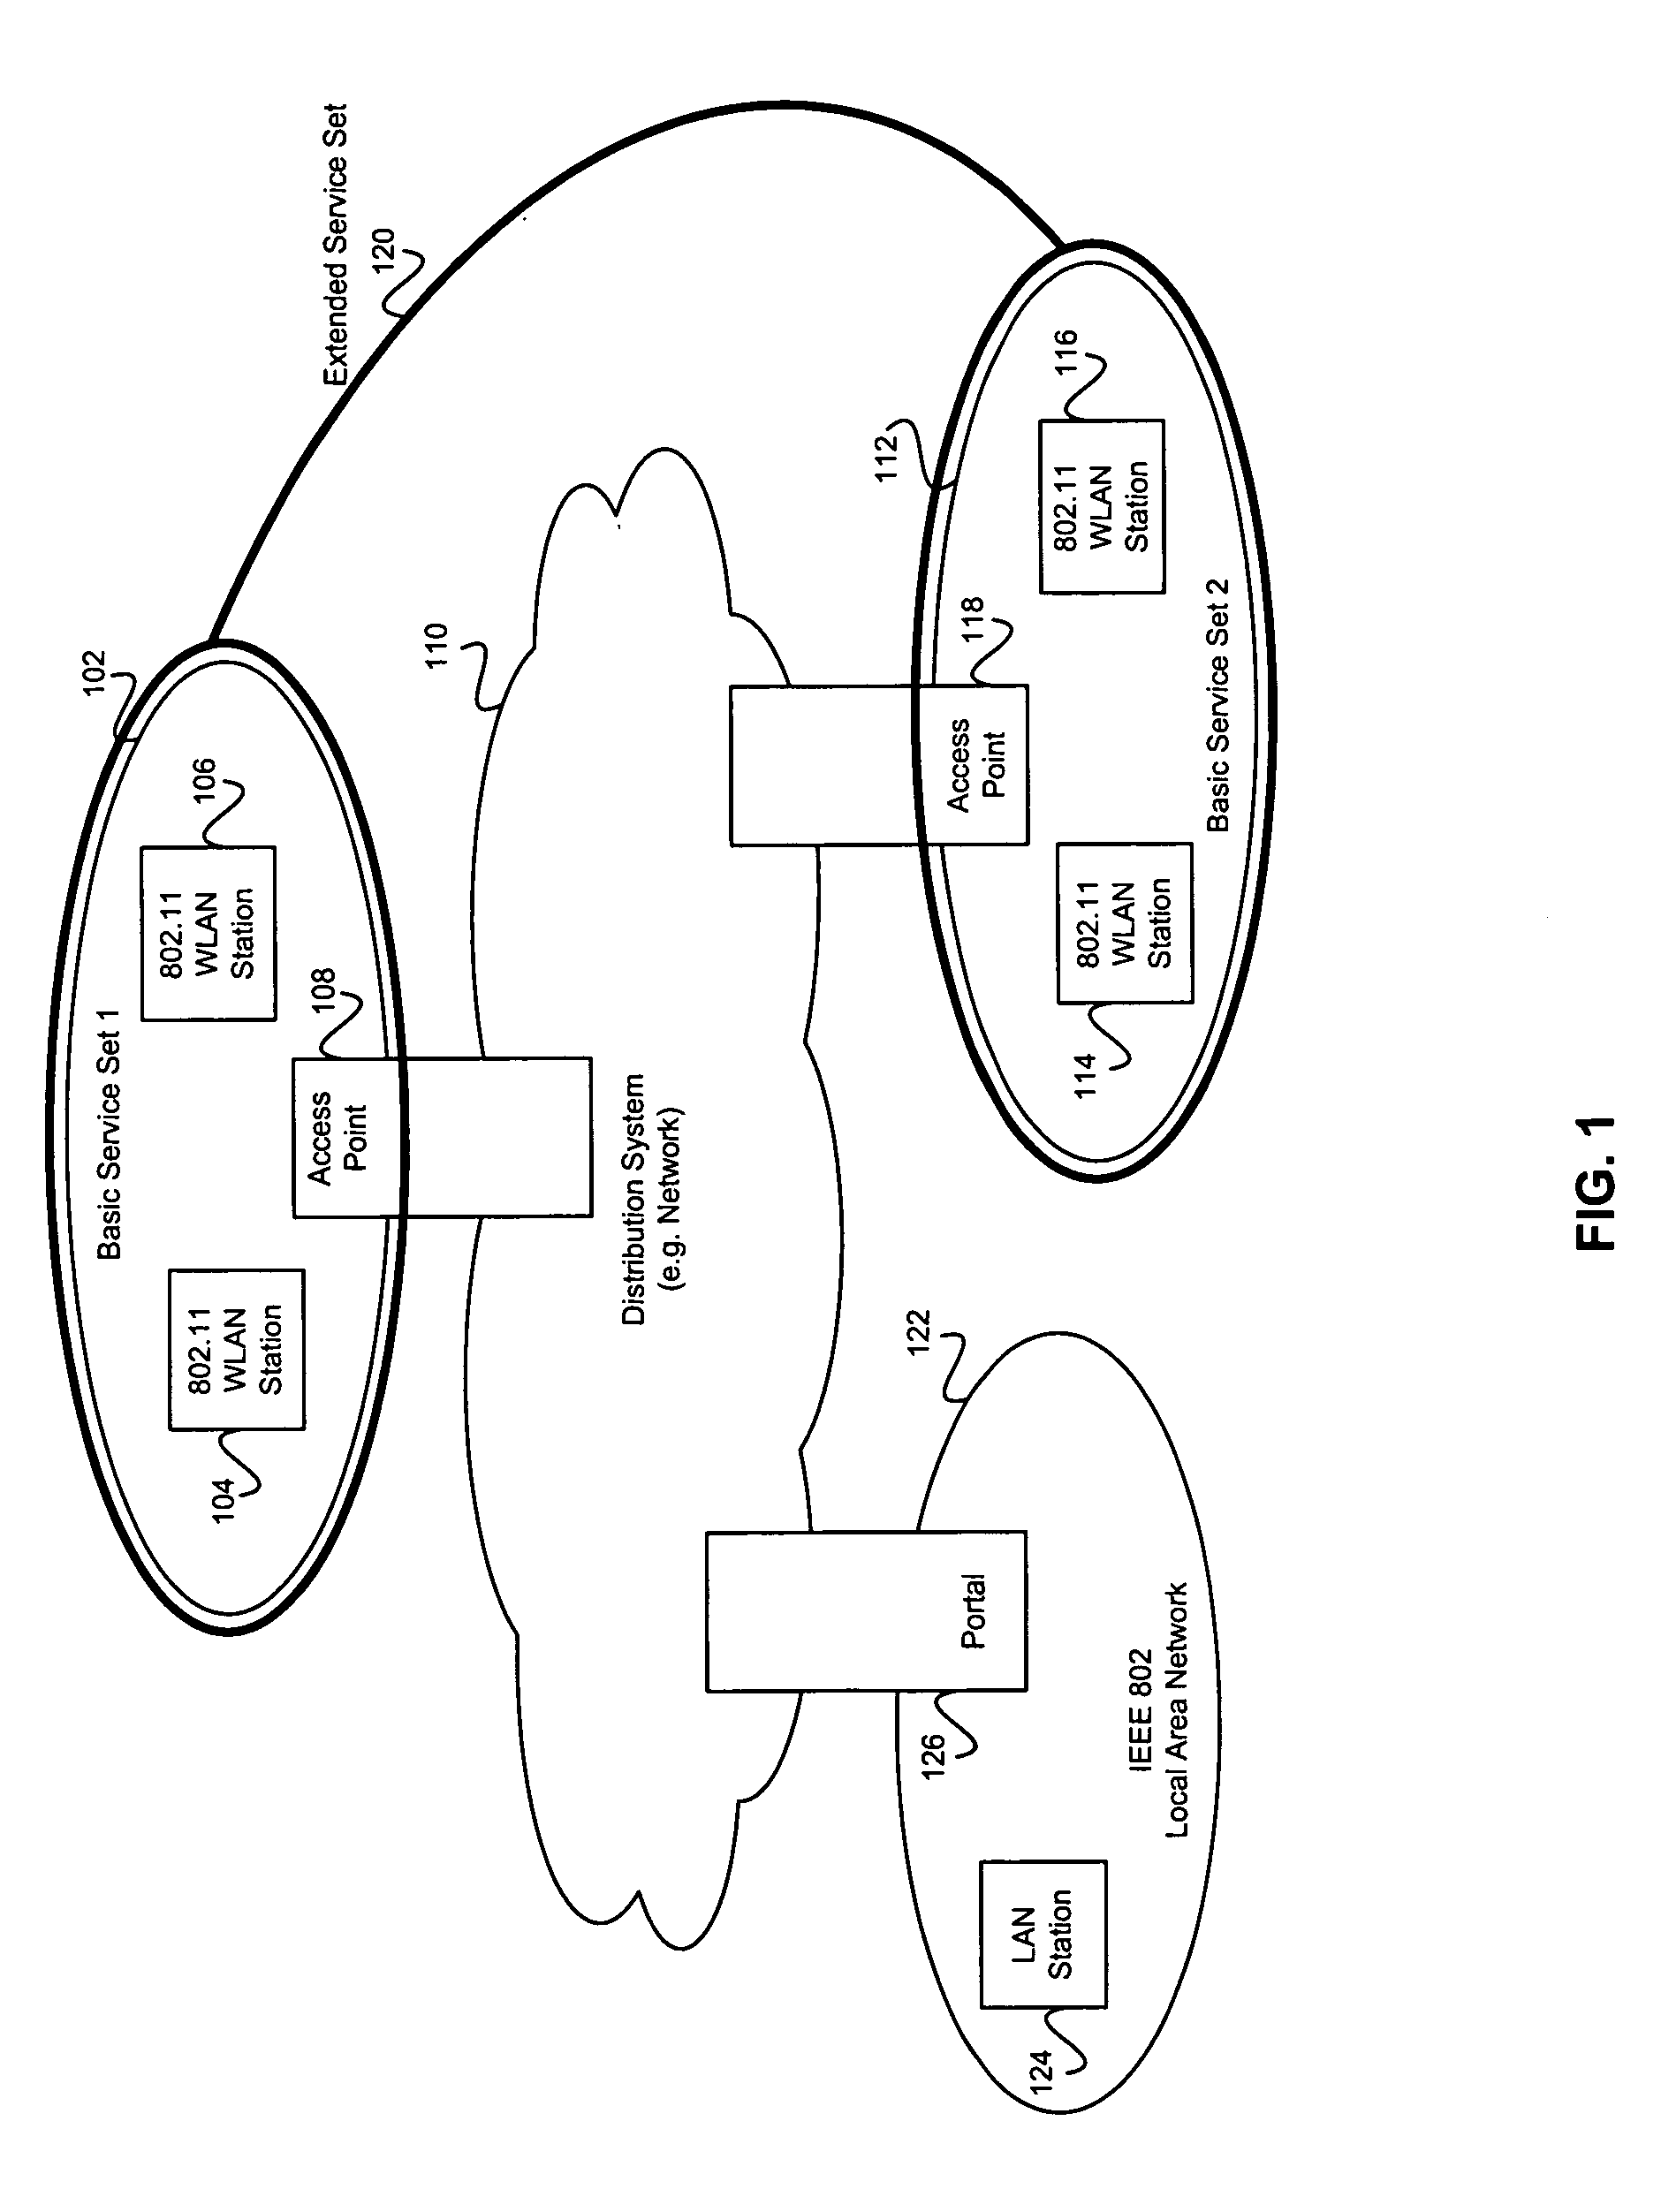 Method and system for utilizing givens rotation to reduce feedback information overhead